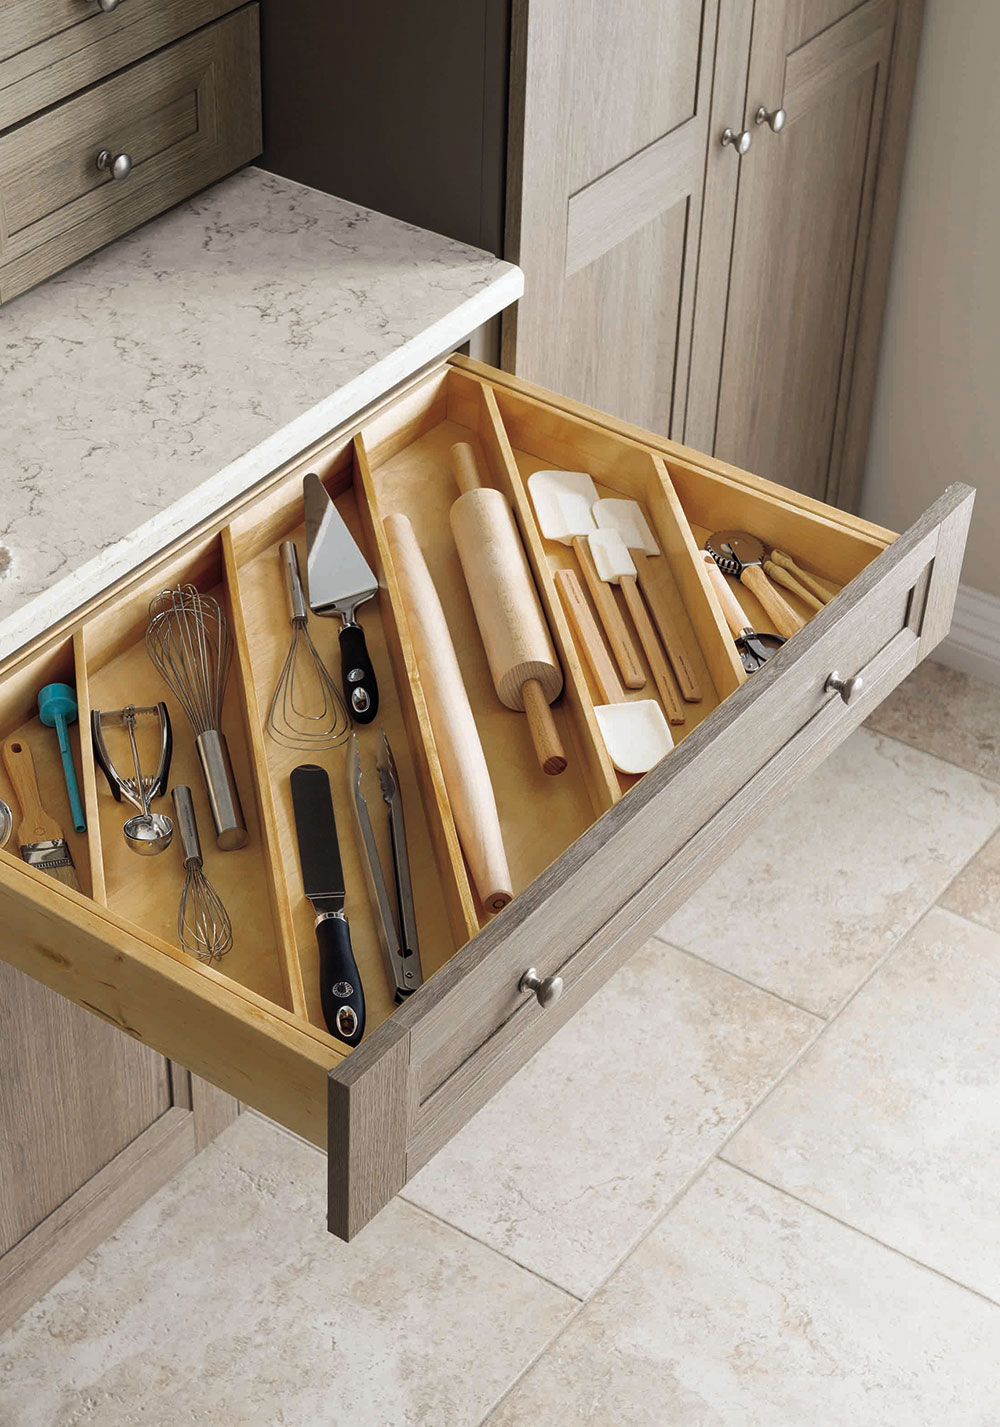 Utensils-Set-Up-Diagonally-In-a-Drawer How to Organize Kitchen Utensils to Find Them Better